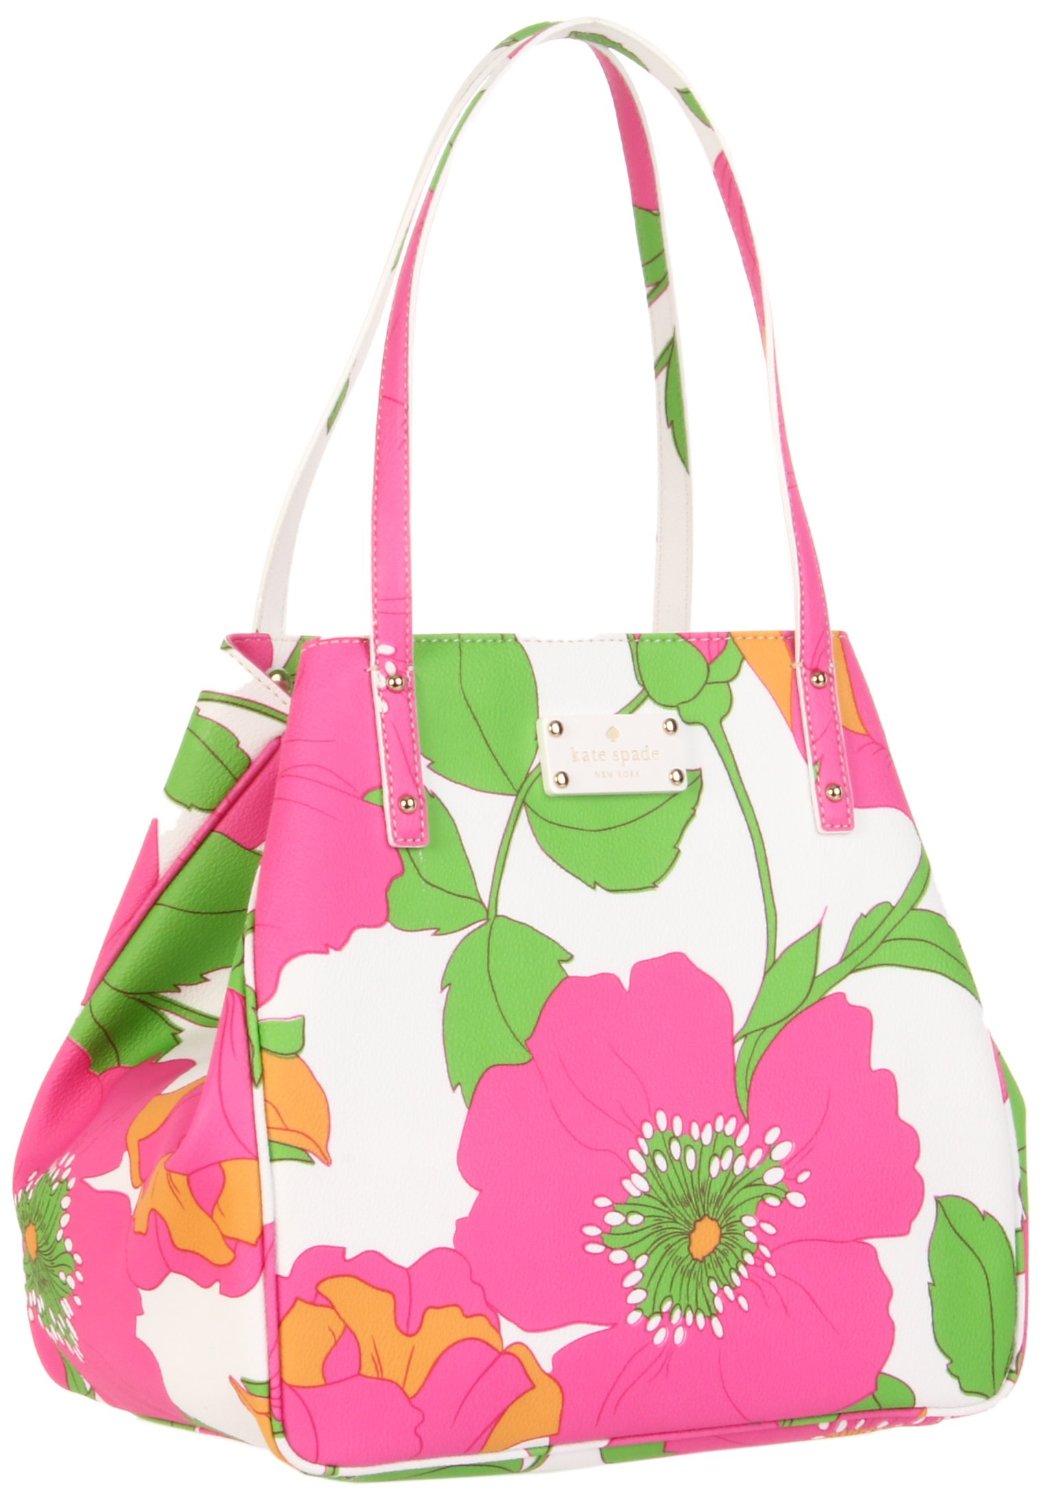 Kate Spade New York High Falls Sidney Tote in Floral (gulabi floral) | Lyst